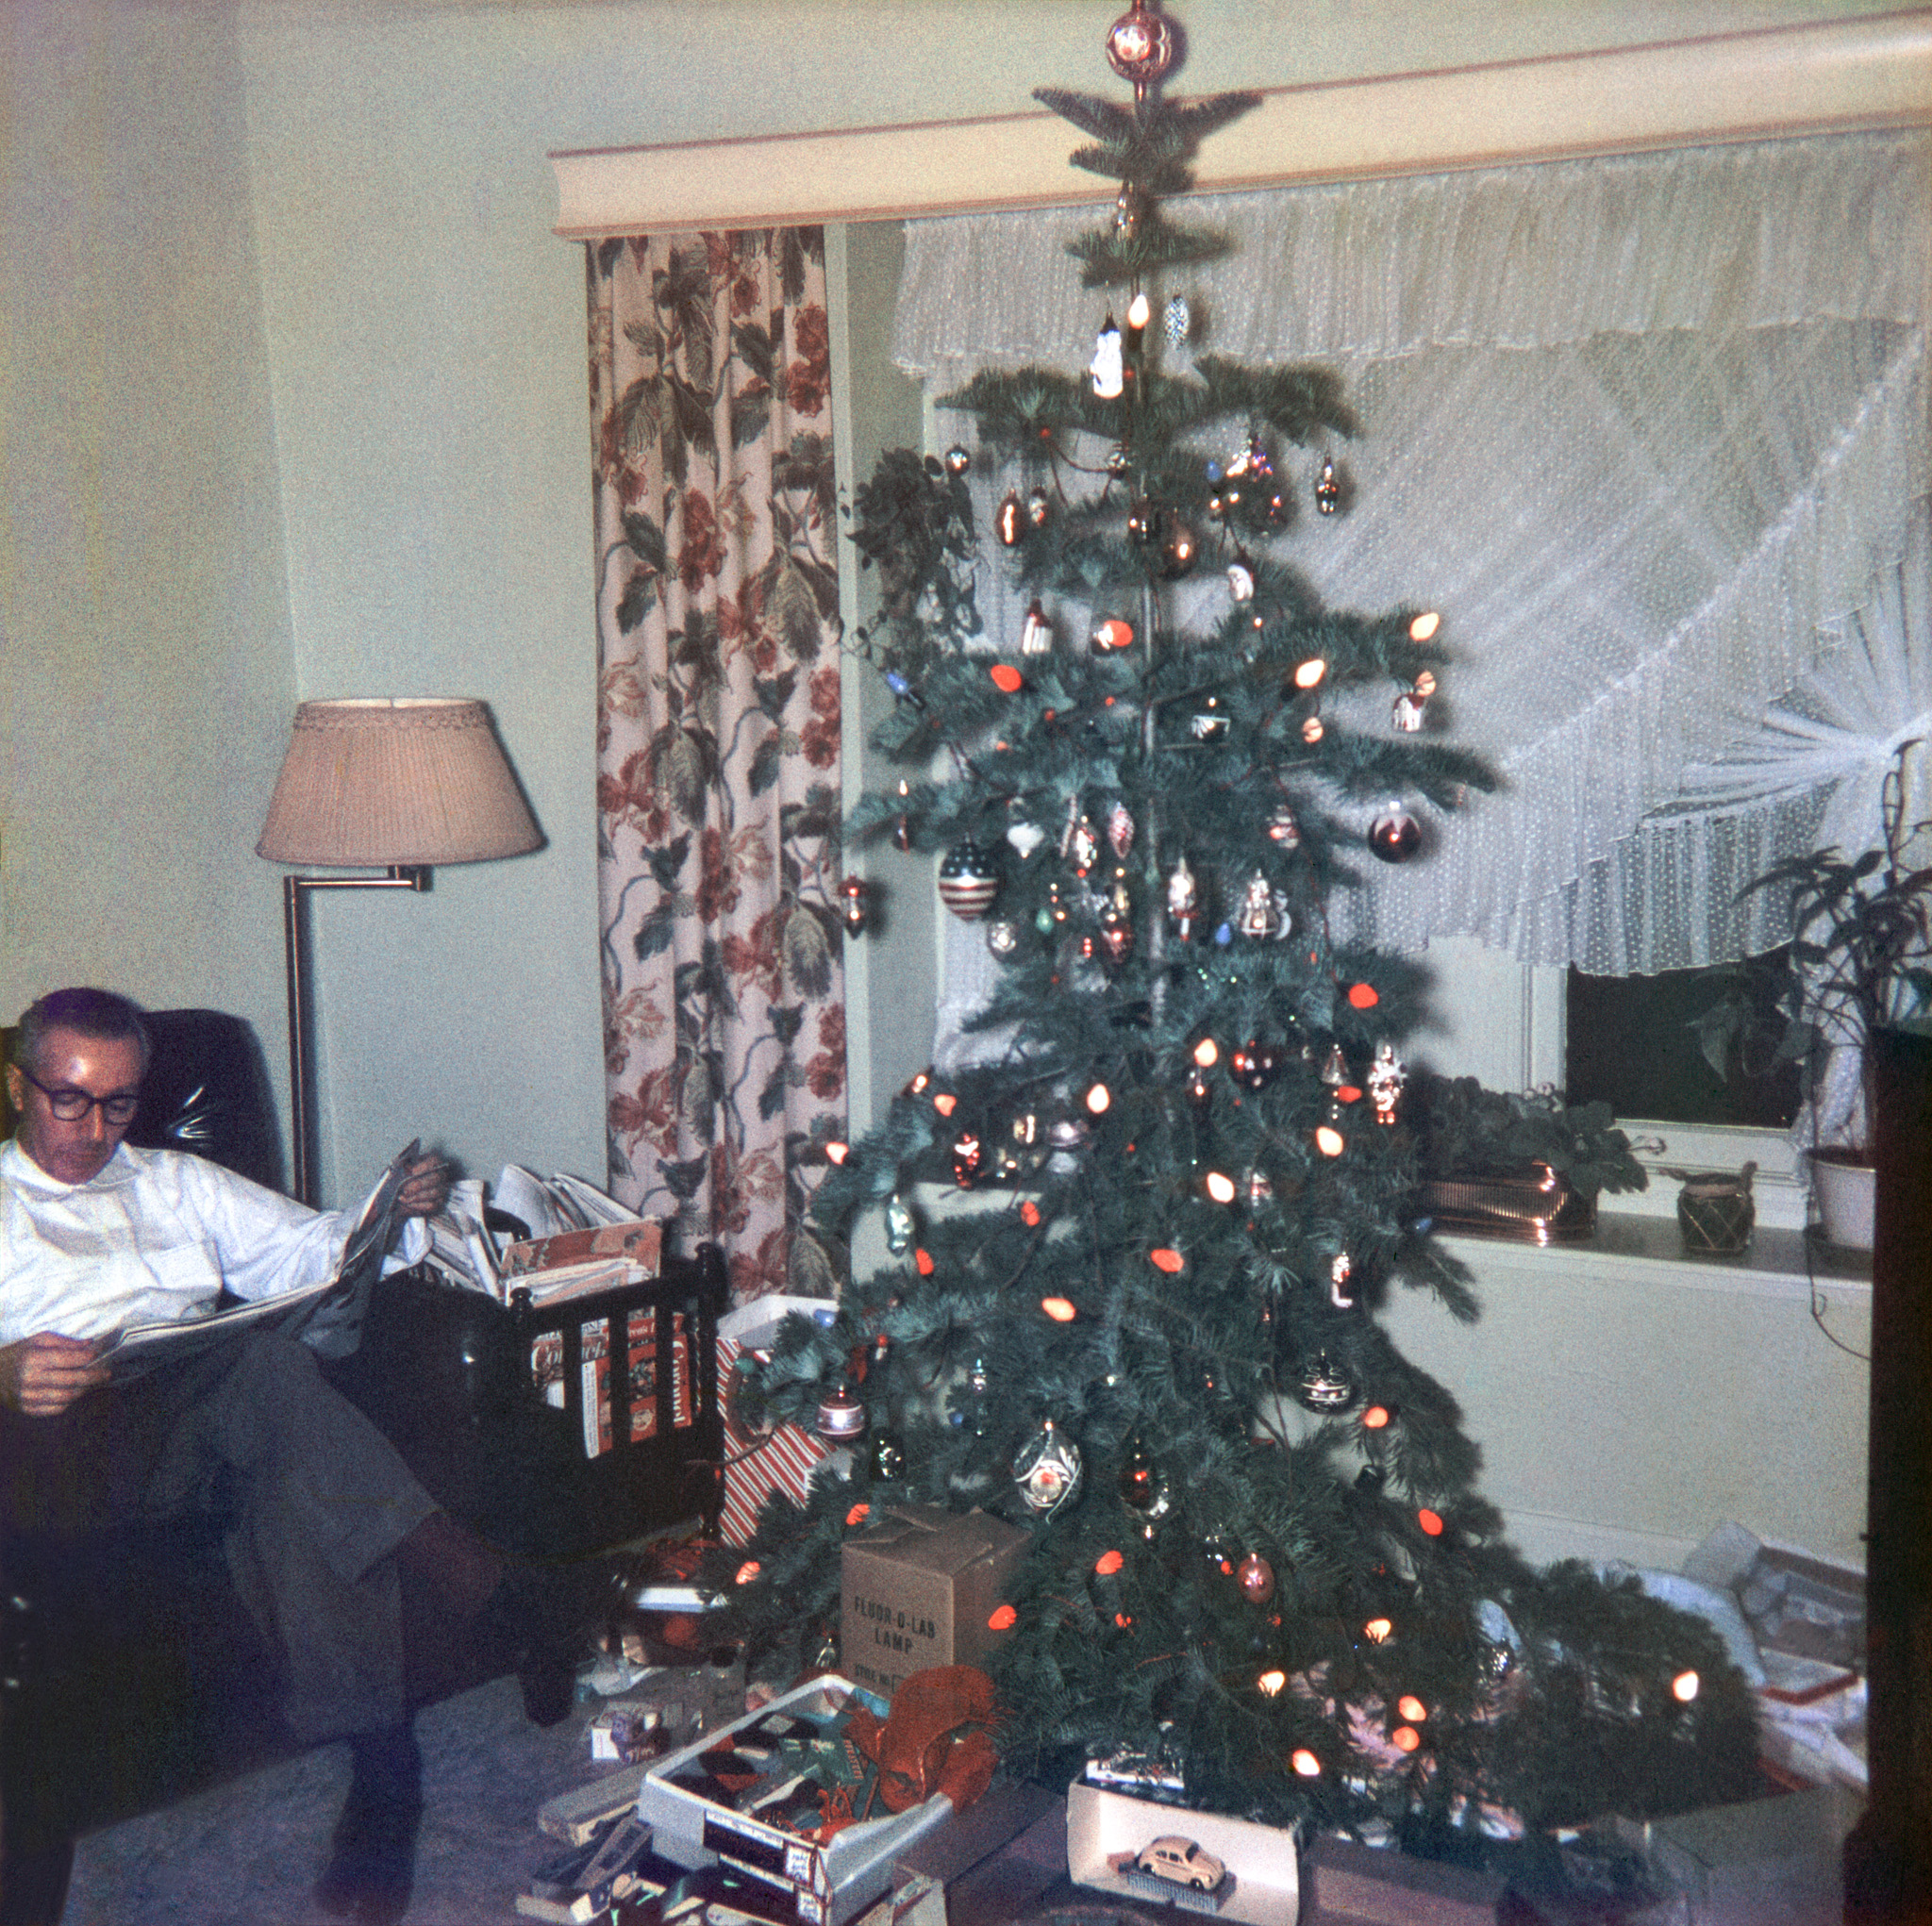 The gift-unwrapping frenzy past, and despite his being nearly crowded out of the frame, my father seems to be finding serenity by returning to normal daily routine, i.e. reading in his leather chair. Usually it would be the daily papers, but note the reserve stock of various publications overflowing the magazine rack. The tree and its environs can be seen pre-frenzy here in a post I made ten years ago. This shot was taken by my sister on 2-1/4-square transparency film. (Guess which of the discernible presents is obviously mine?) View full size.